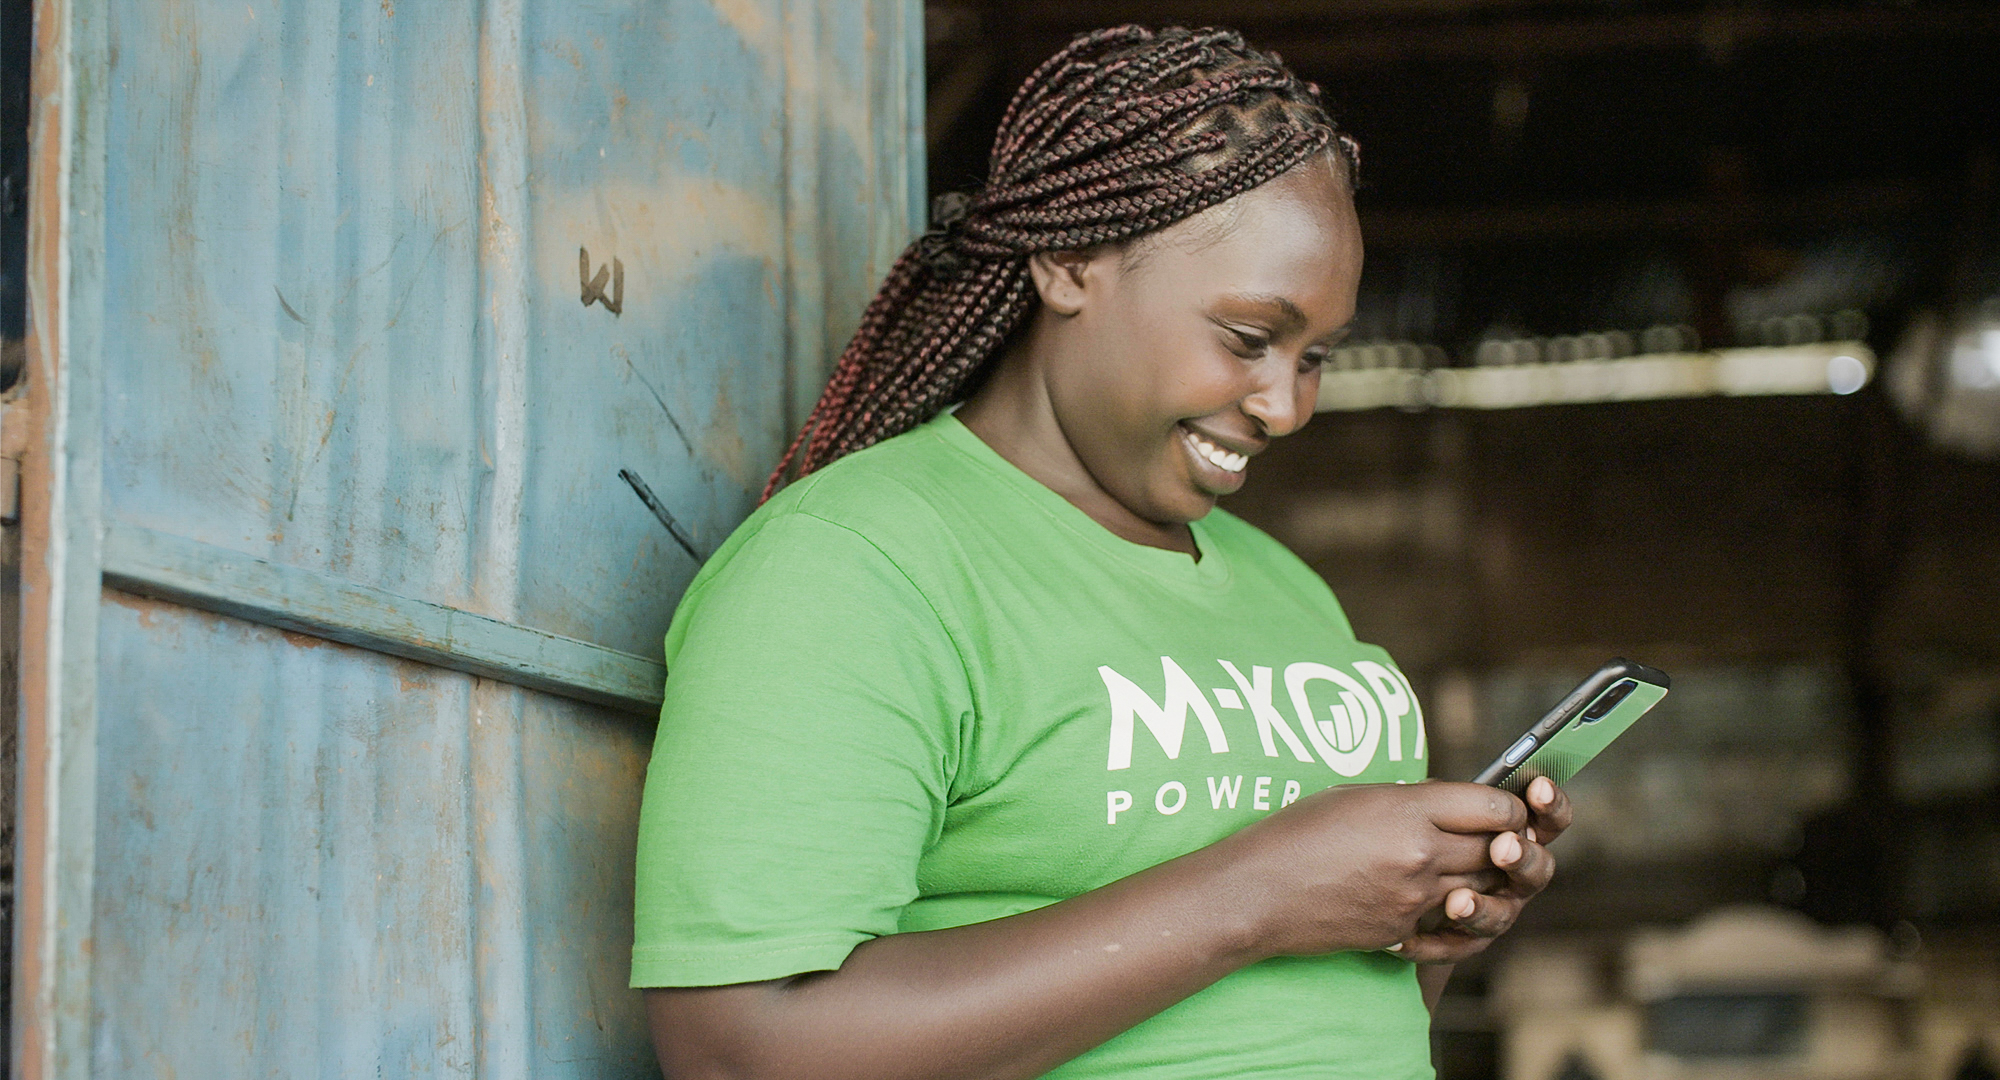 A woman in a green shirt smiles and looks at a cellphone